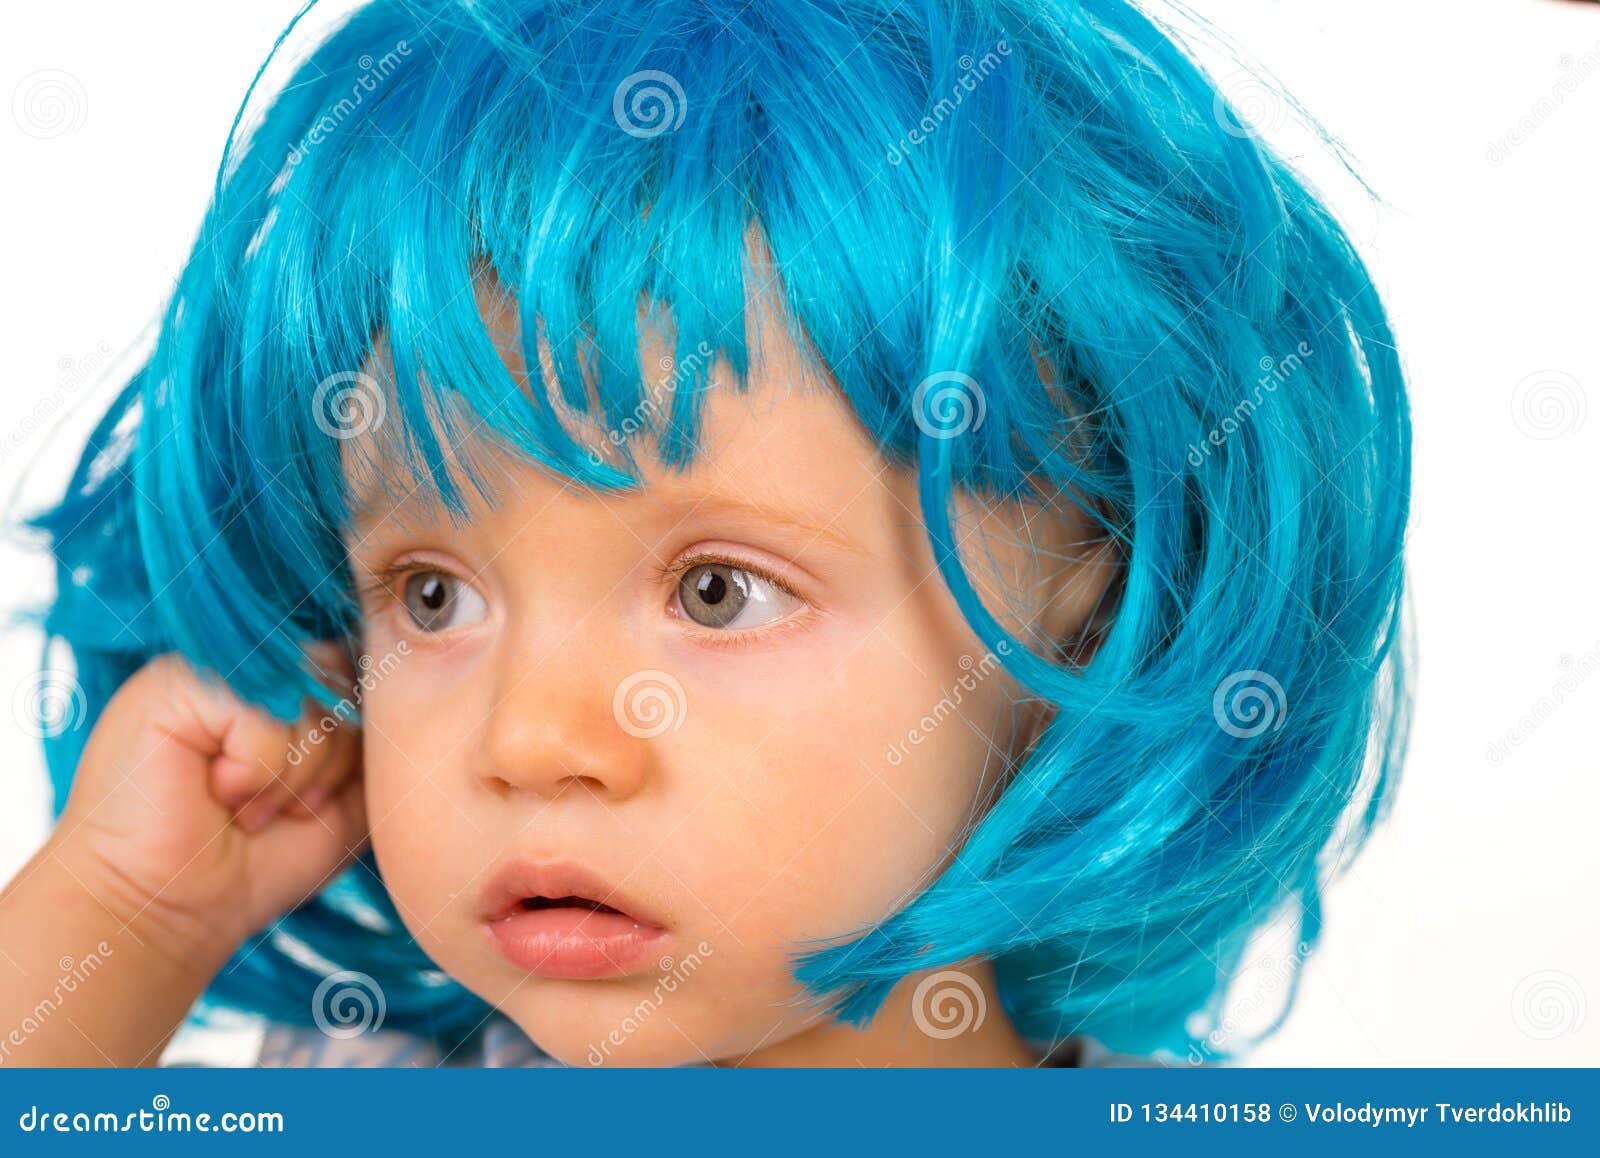 4. Baby Blue Hair in The Simpsons - wide 4